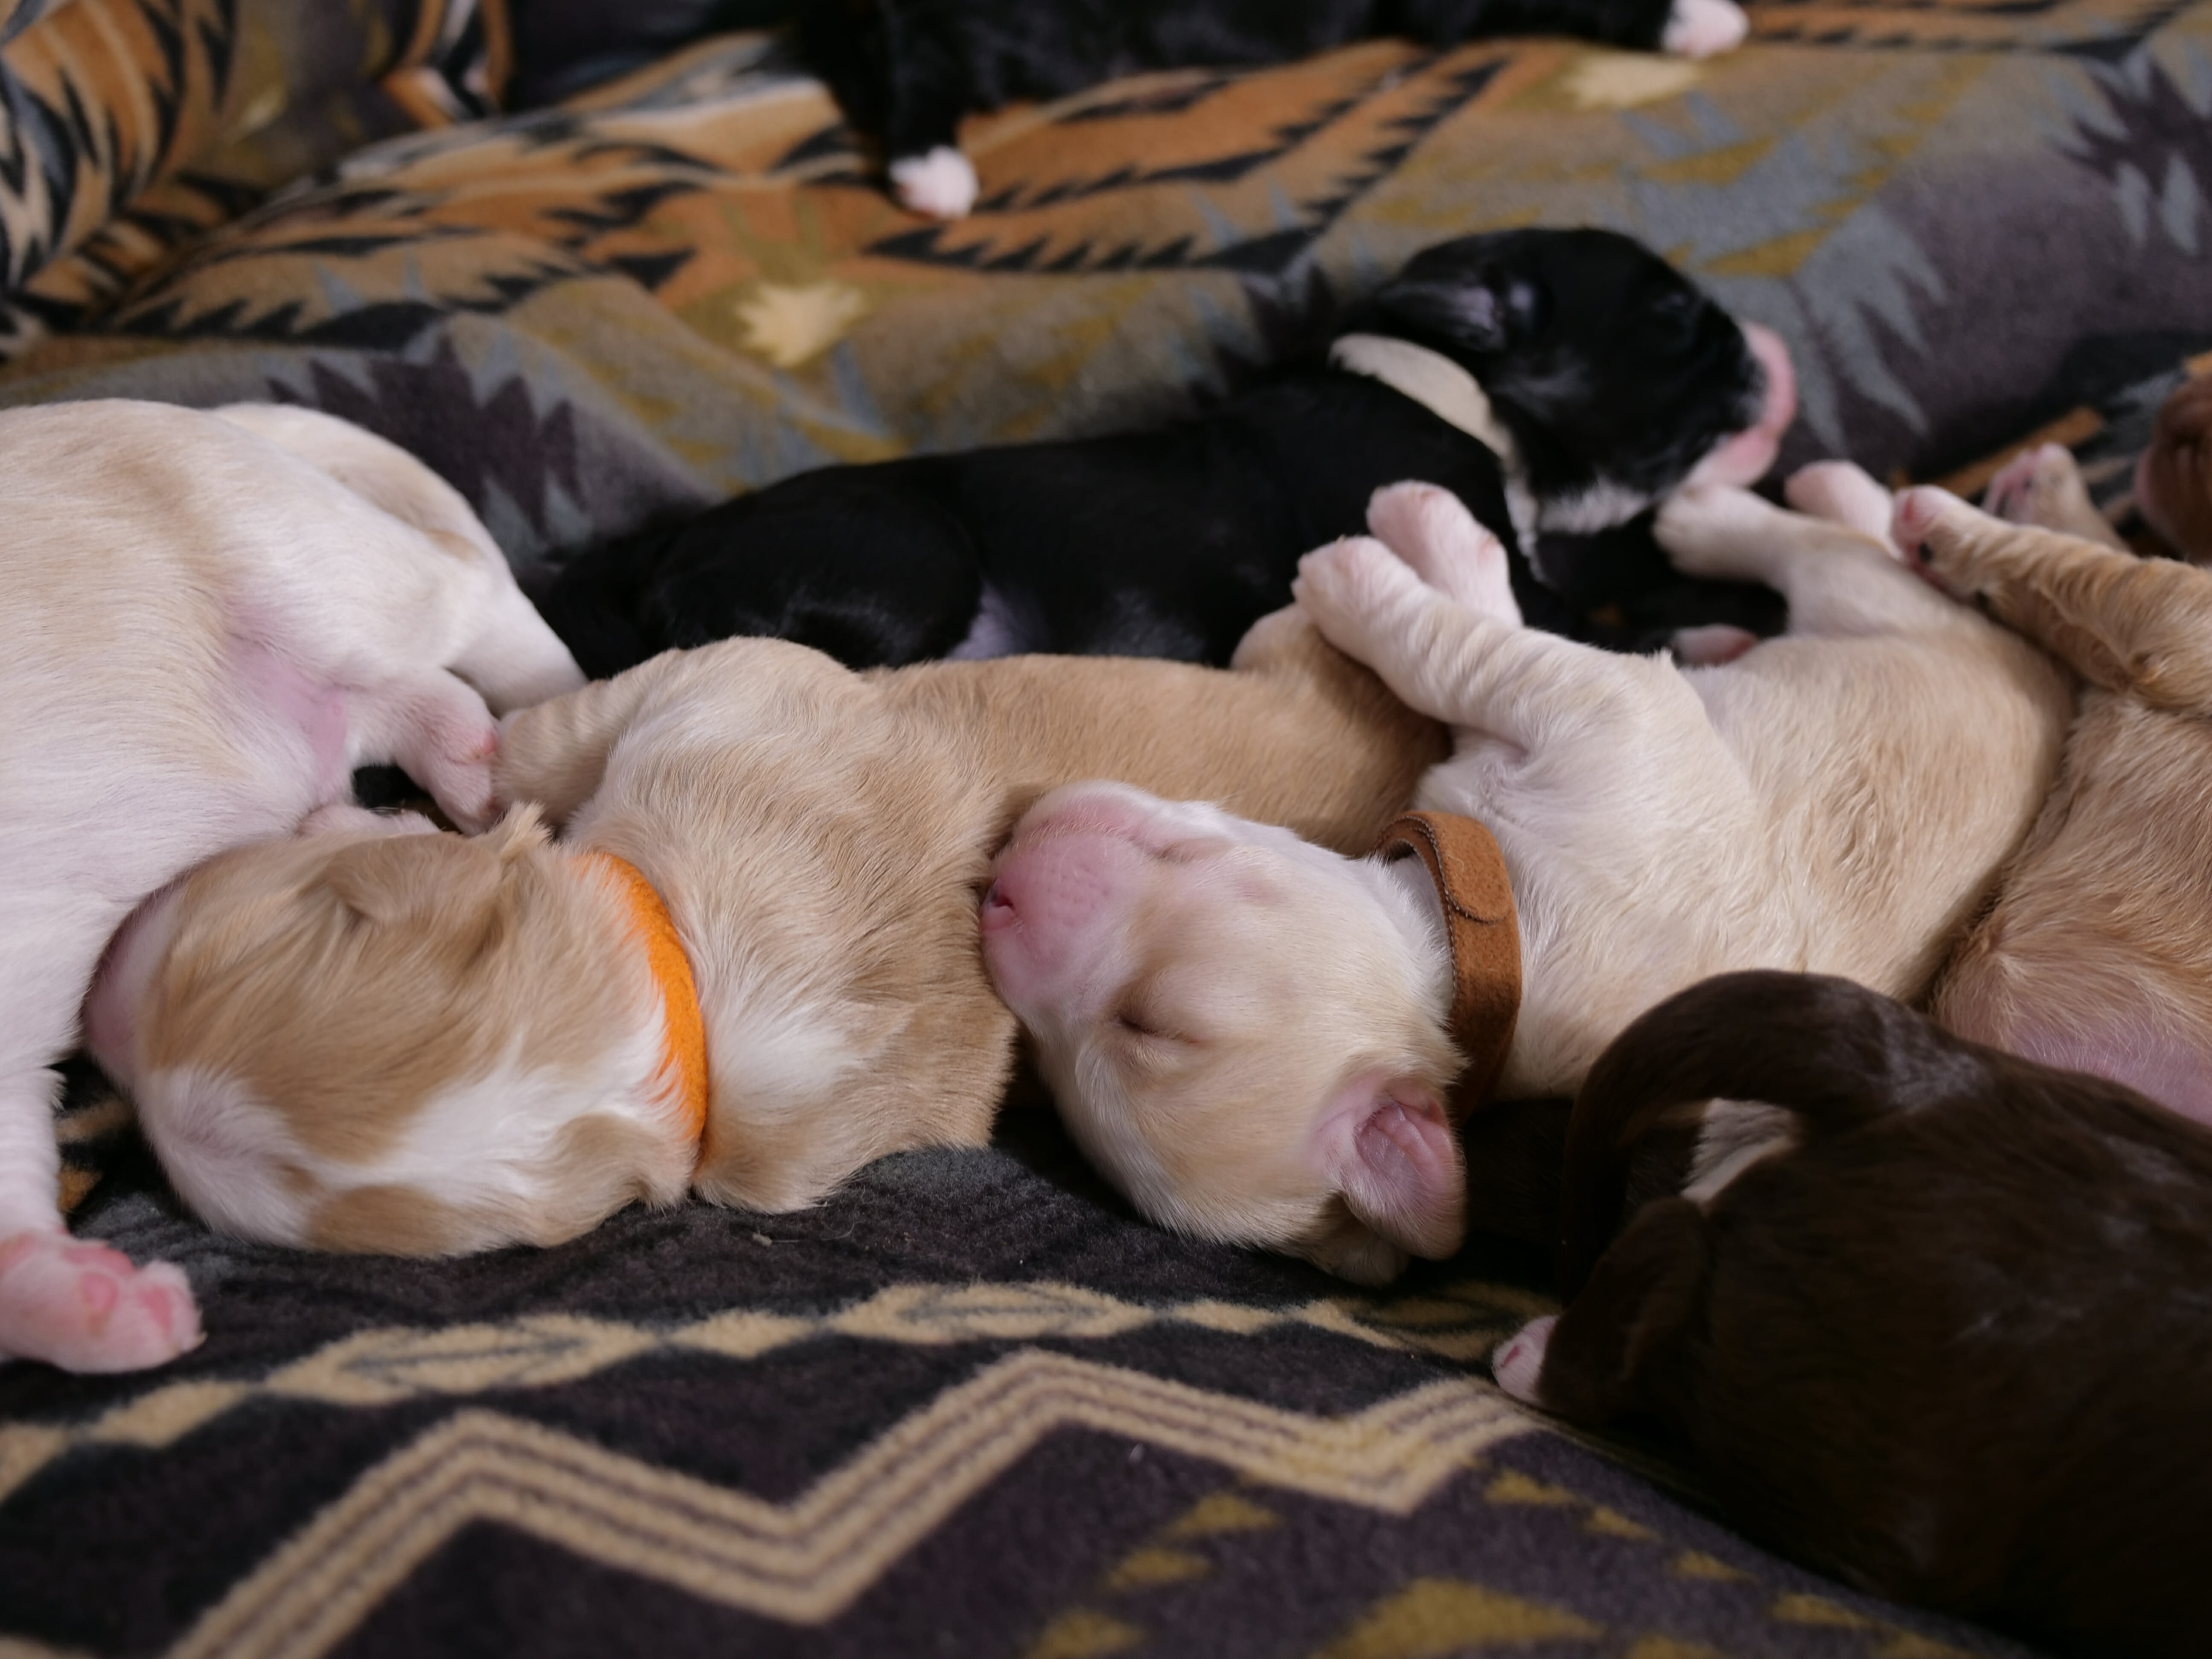 A row of sleeping 1-week old labradoodle puppies sleeping cuddled together. A black puppy is in the background. The foreground has 2 puppies, one is light caramel colored with an orange collar. The other is a cream colored puppy with a brown collar. On the left just the belly of a cream colored puppies belly. The right side has the top of a black puppies head and neck.